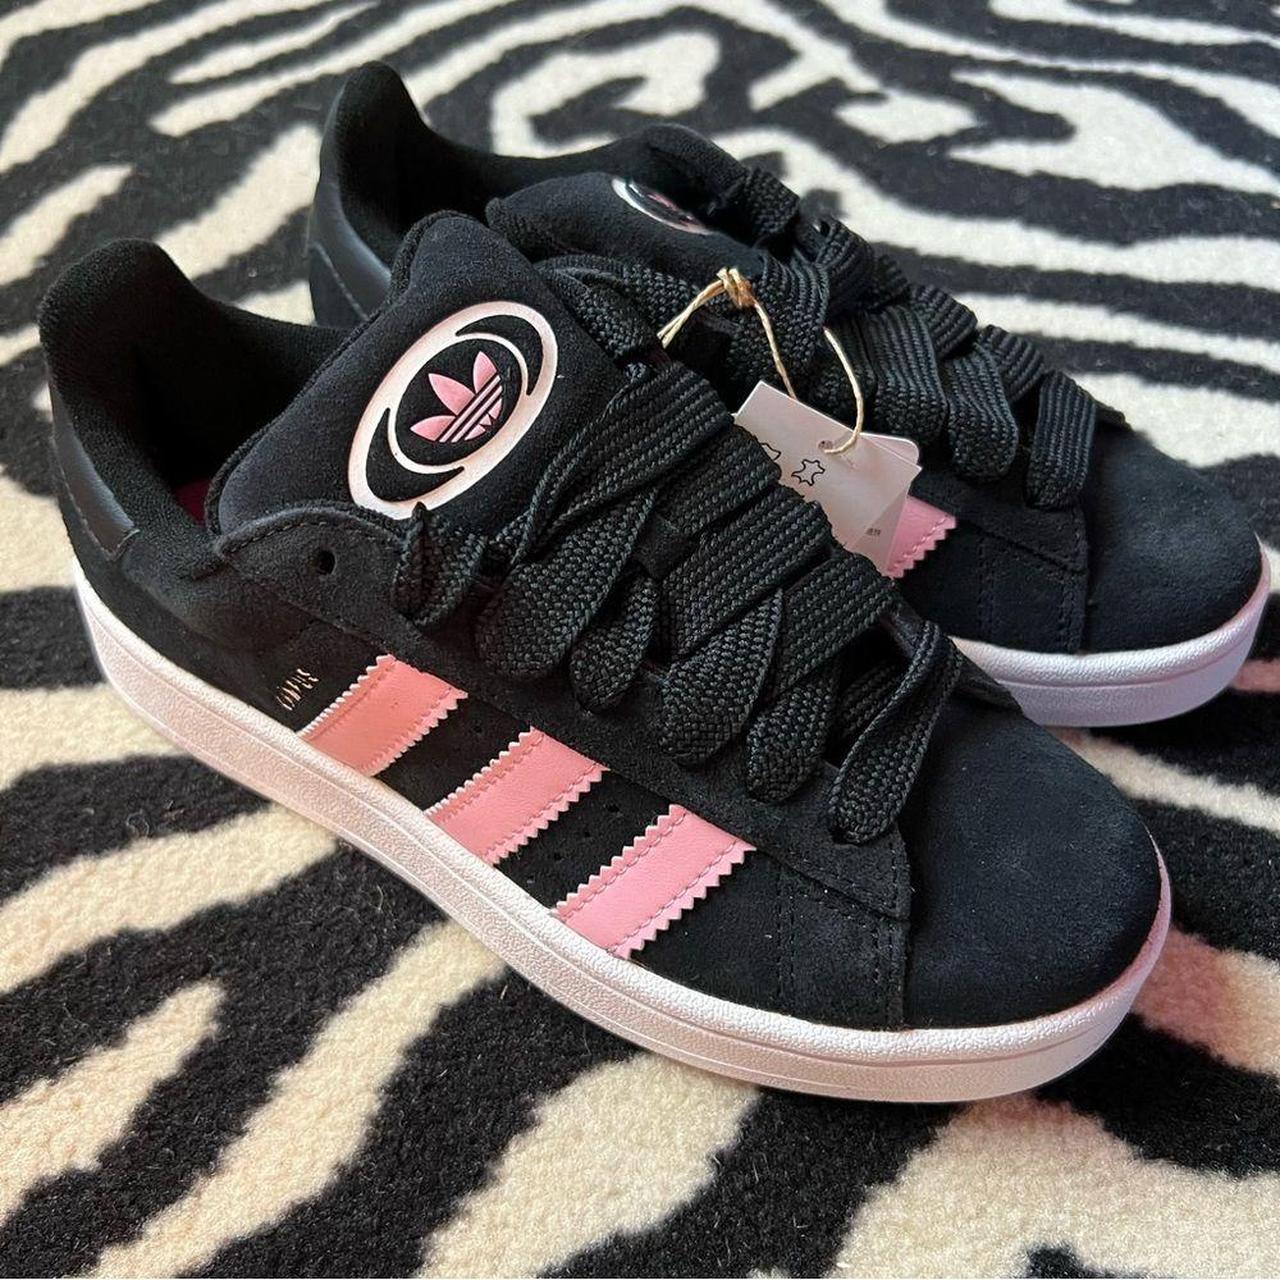 Sneakers in Core... NWT 00s Campus Adidas New Depop - Brand